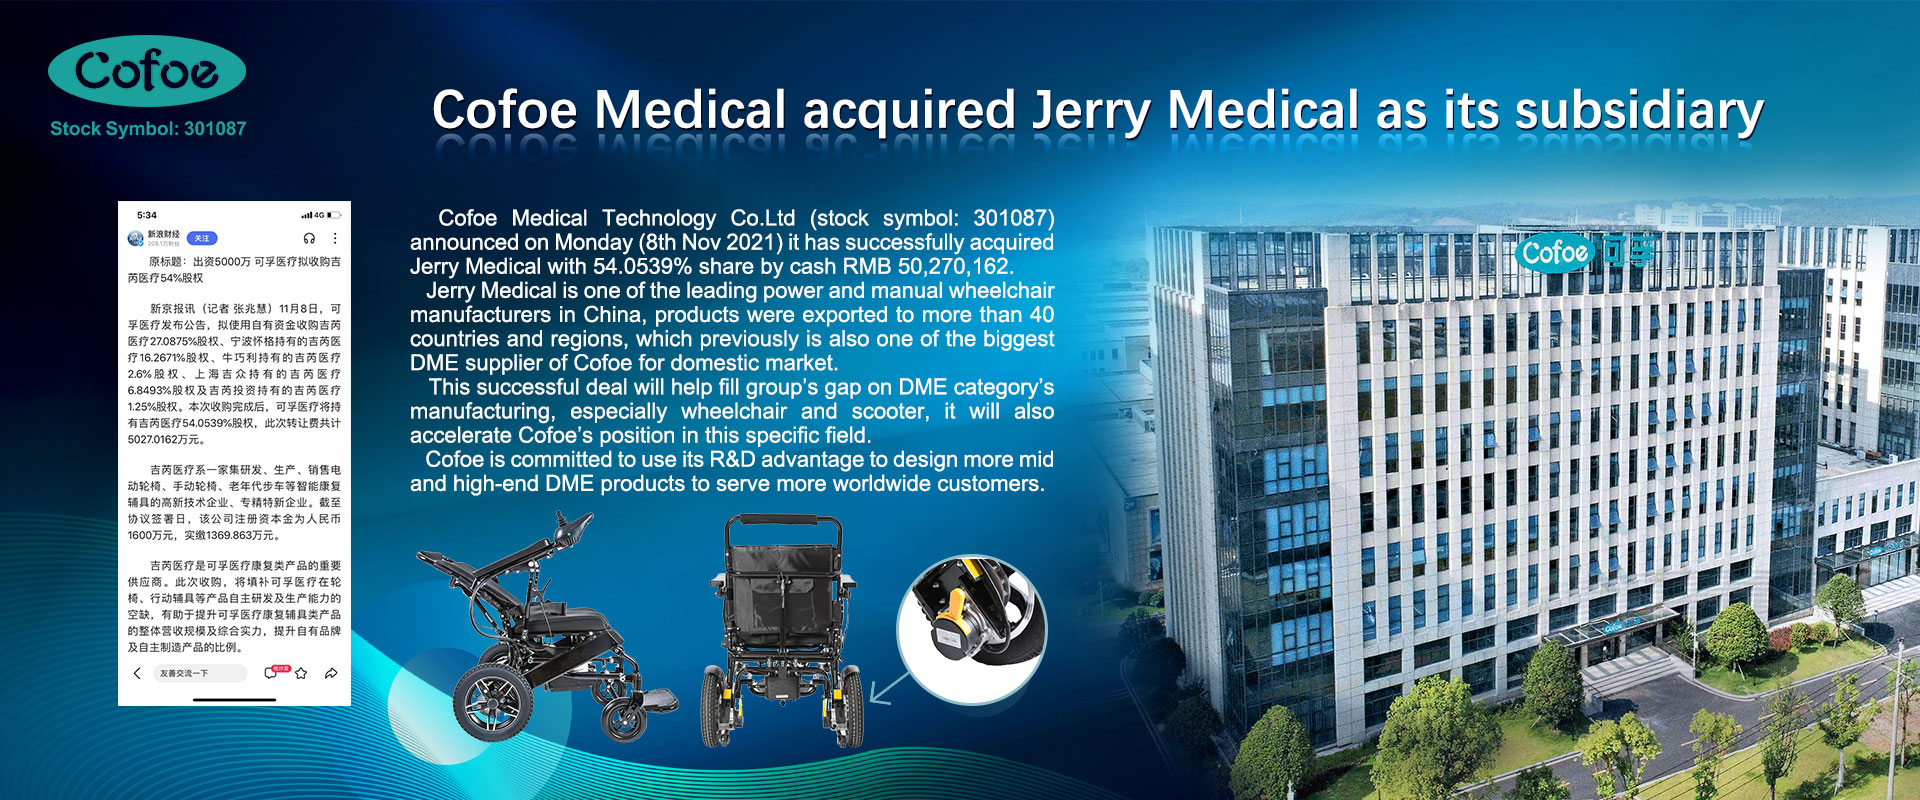 Cofoe Medical Technology Co., Ltd. Aquired Jerry Medical as its Subsidiary